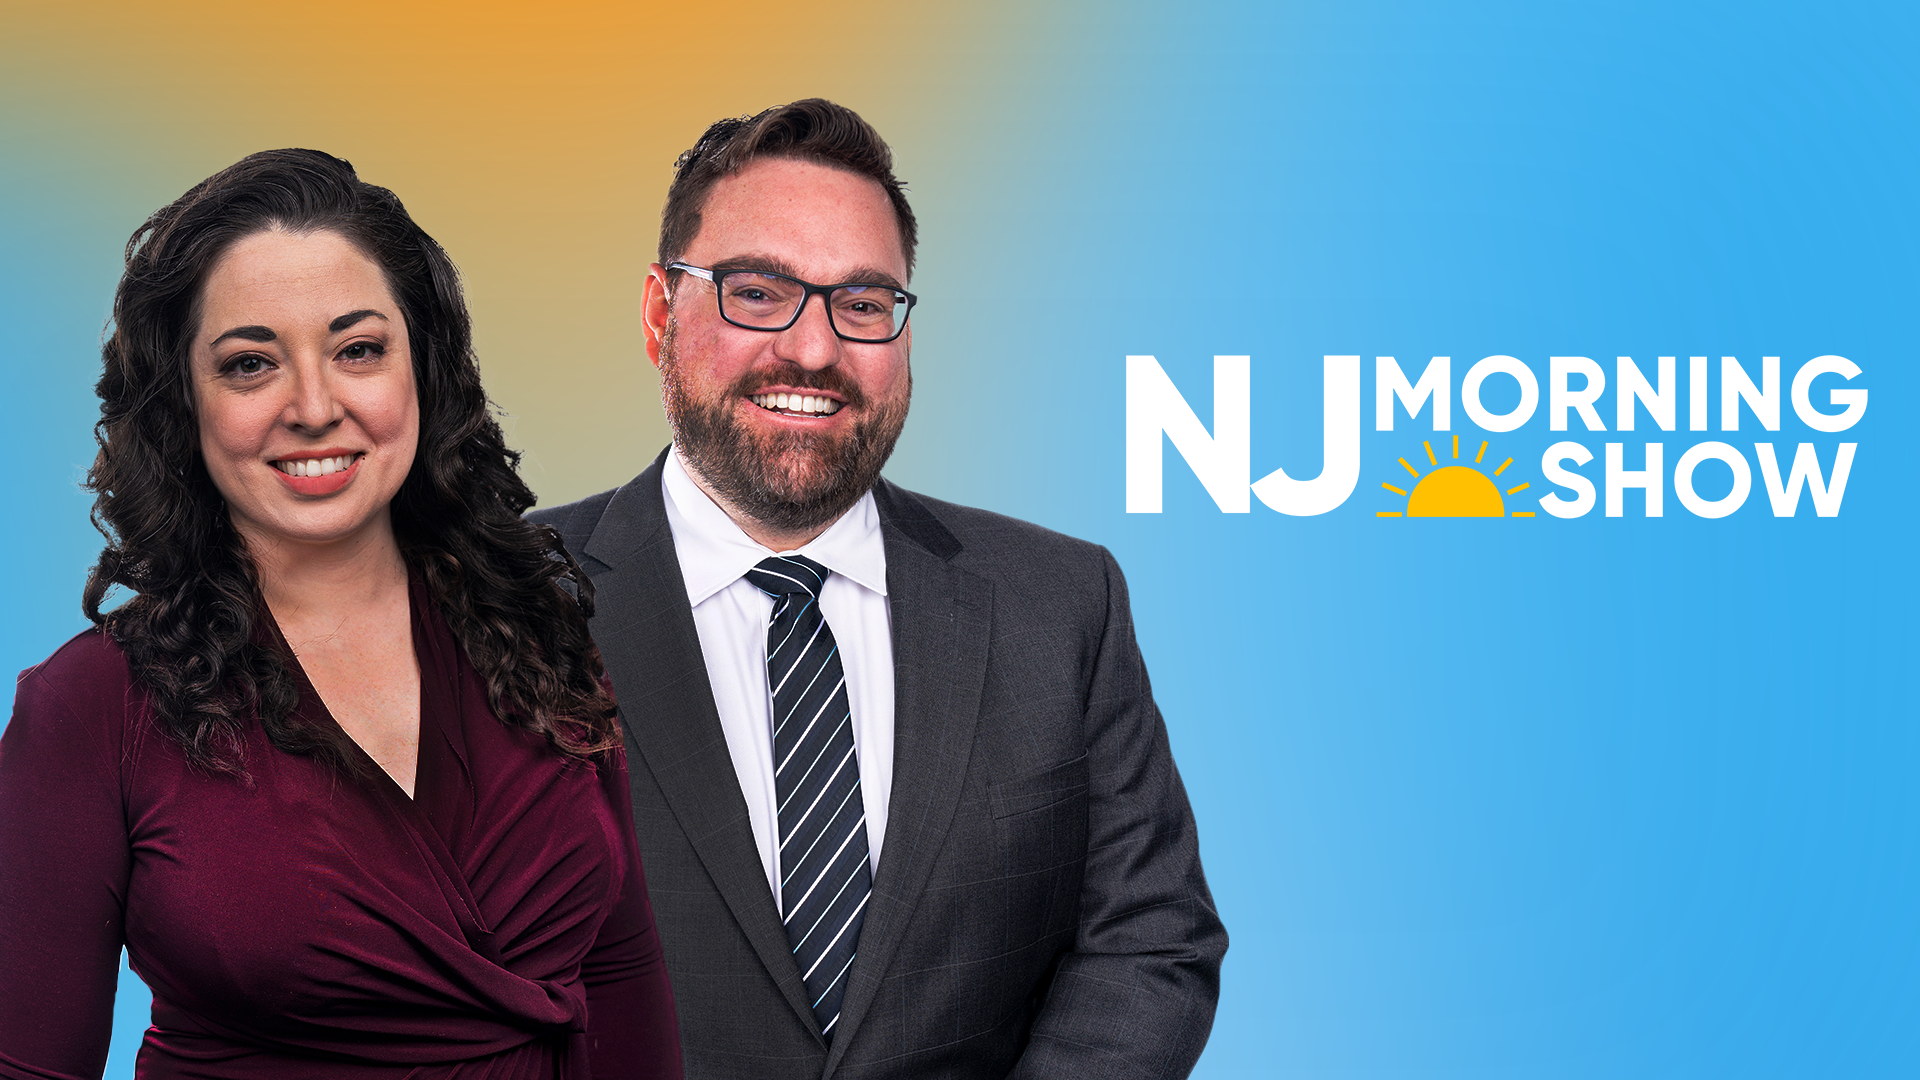 New Jersey Morning Show – August 4, 2022